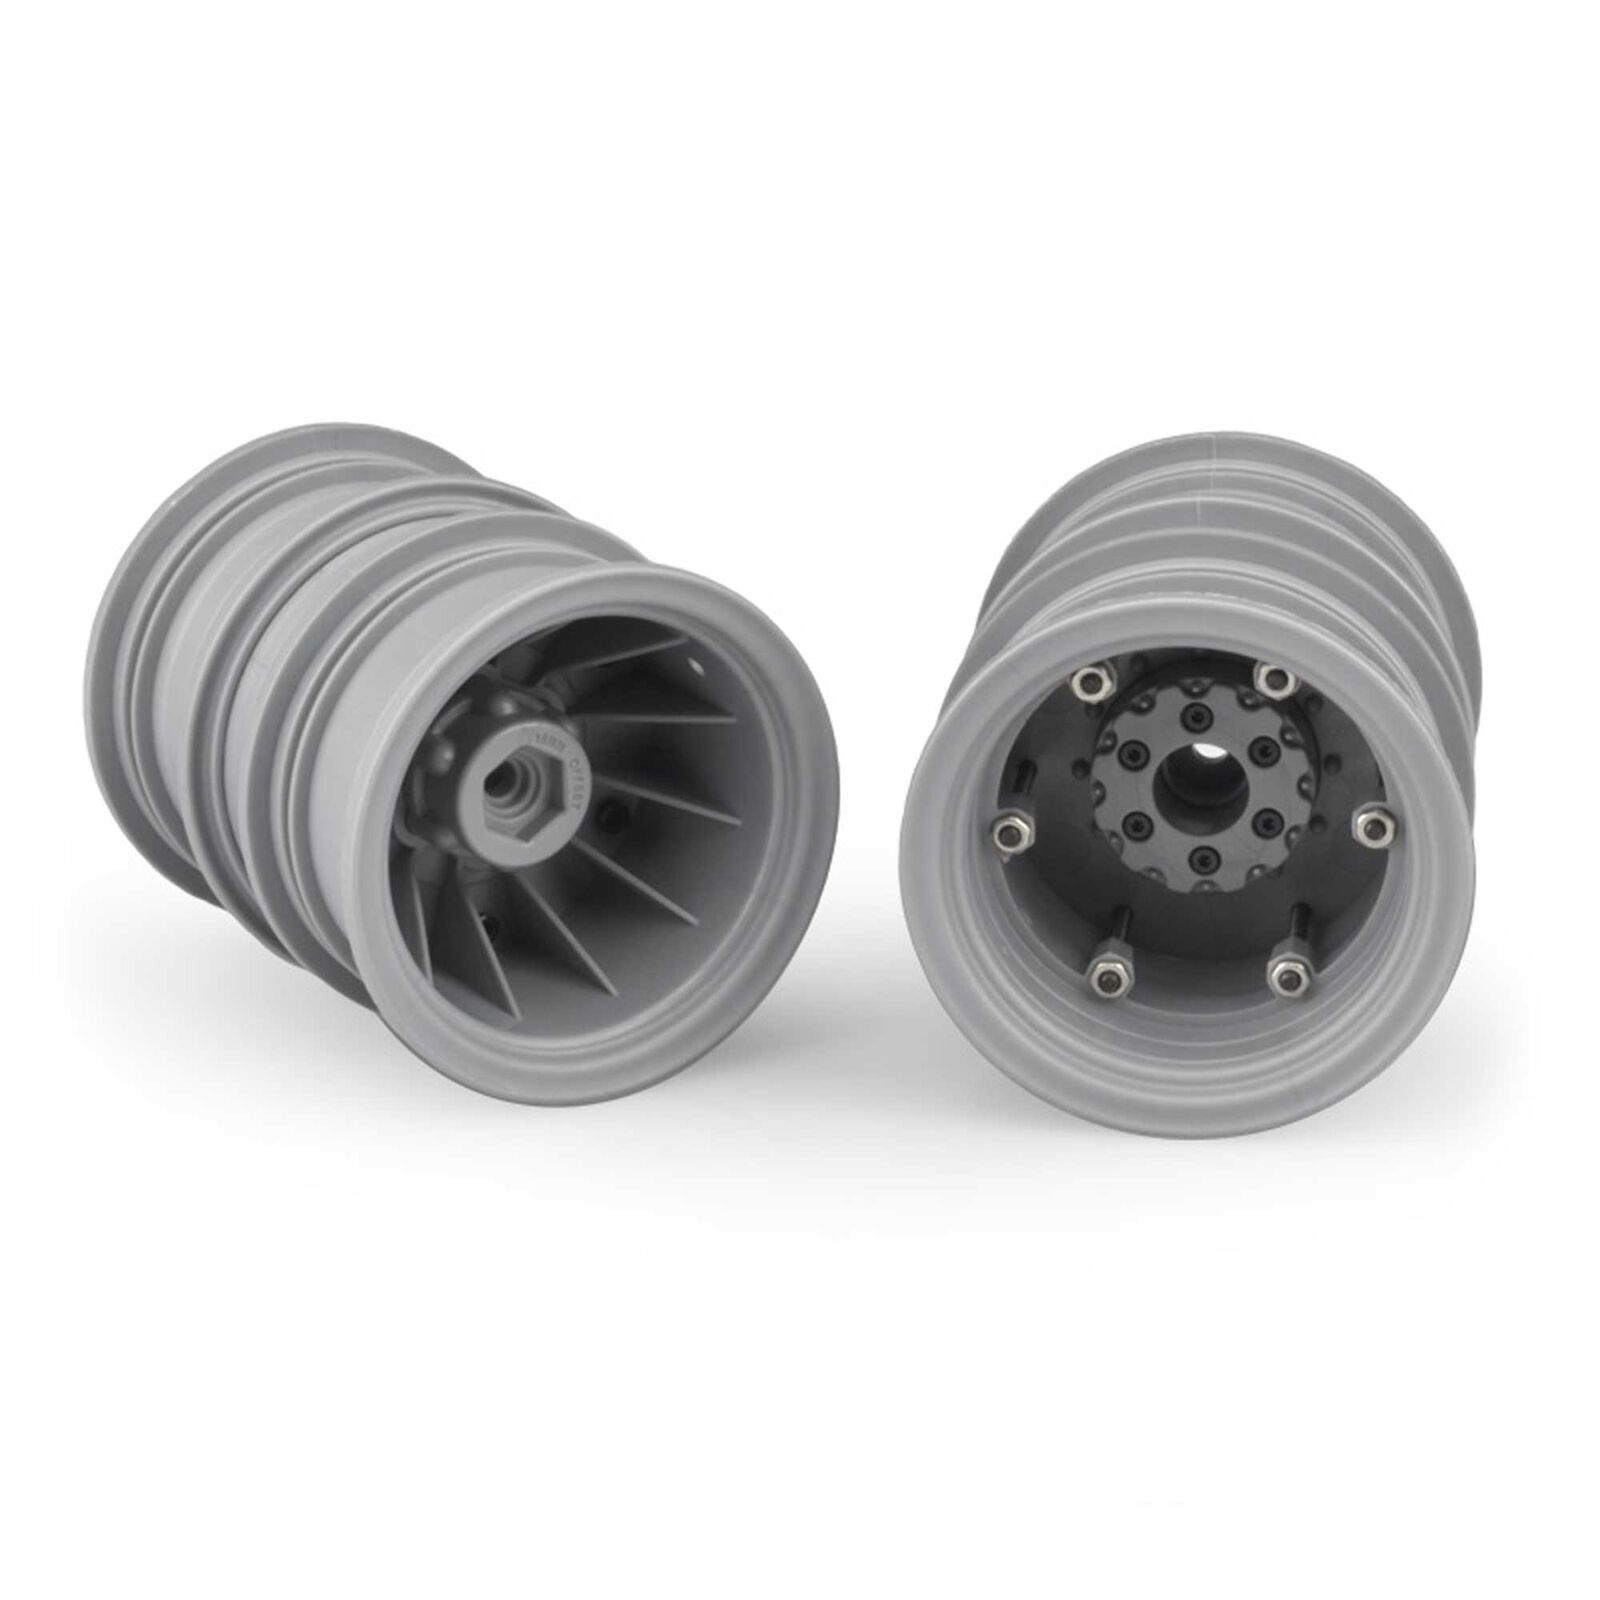 Krimson Dually 2.6 Dual Wheels with Adapters, Gray/Silver (2)